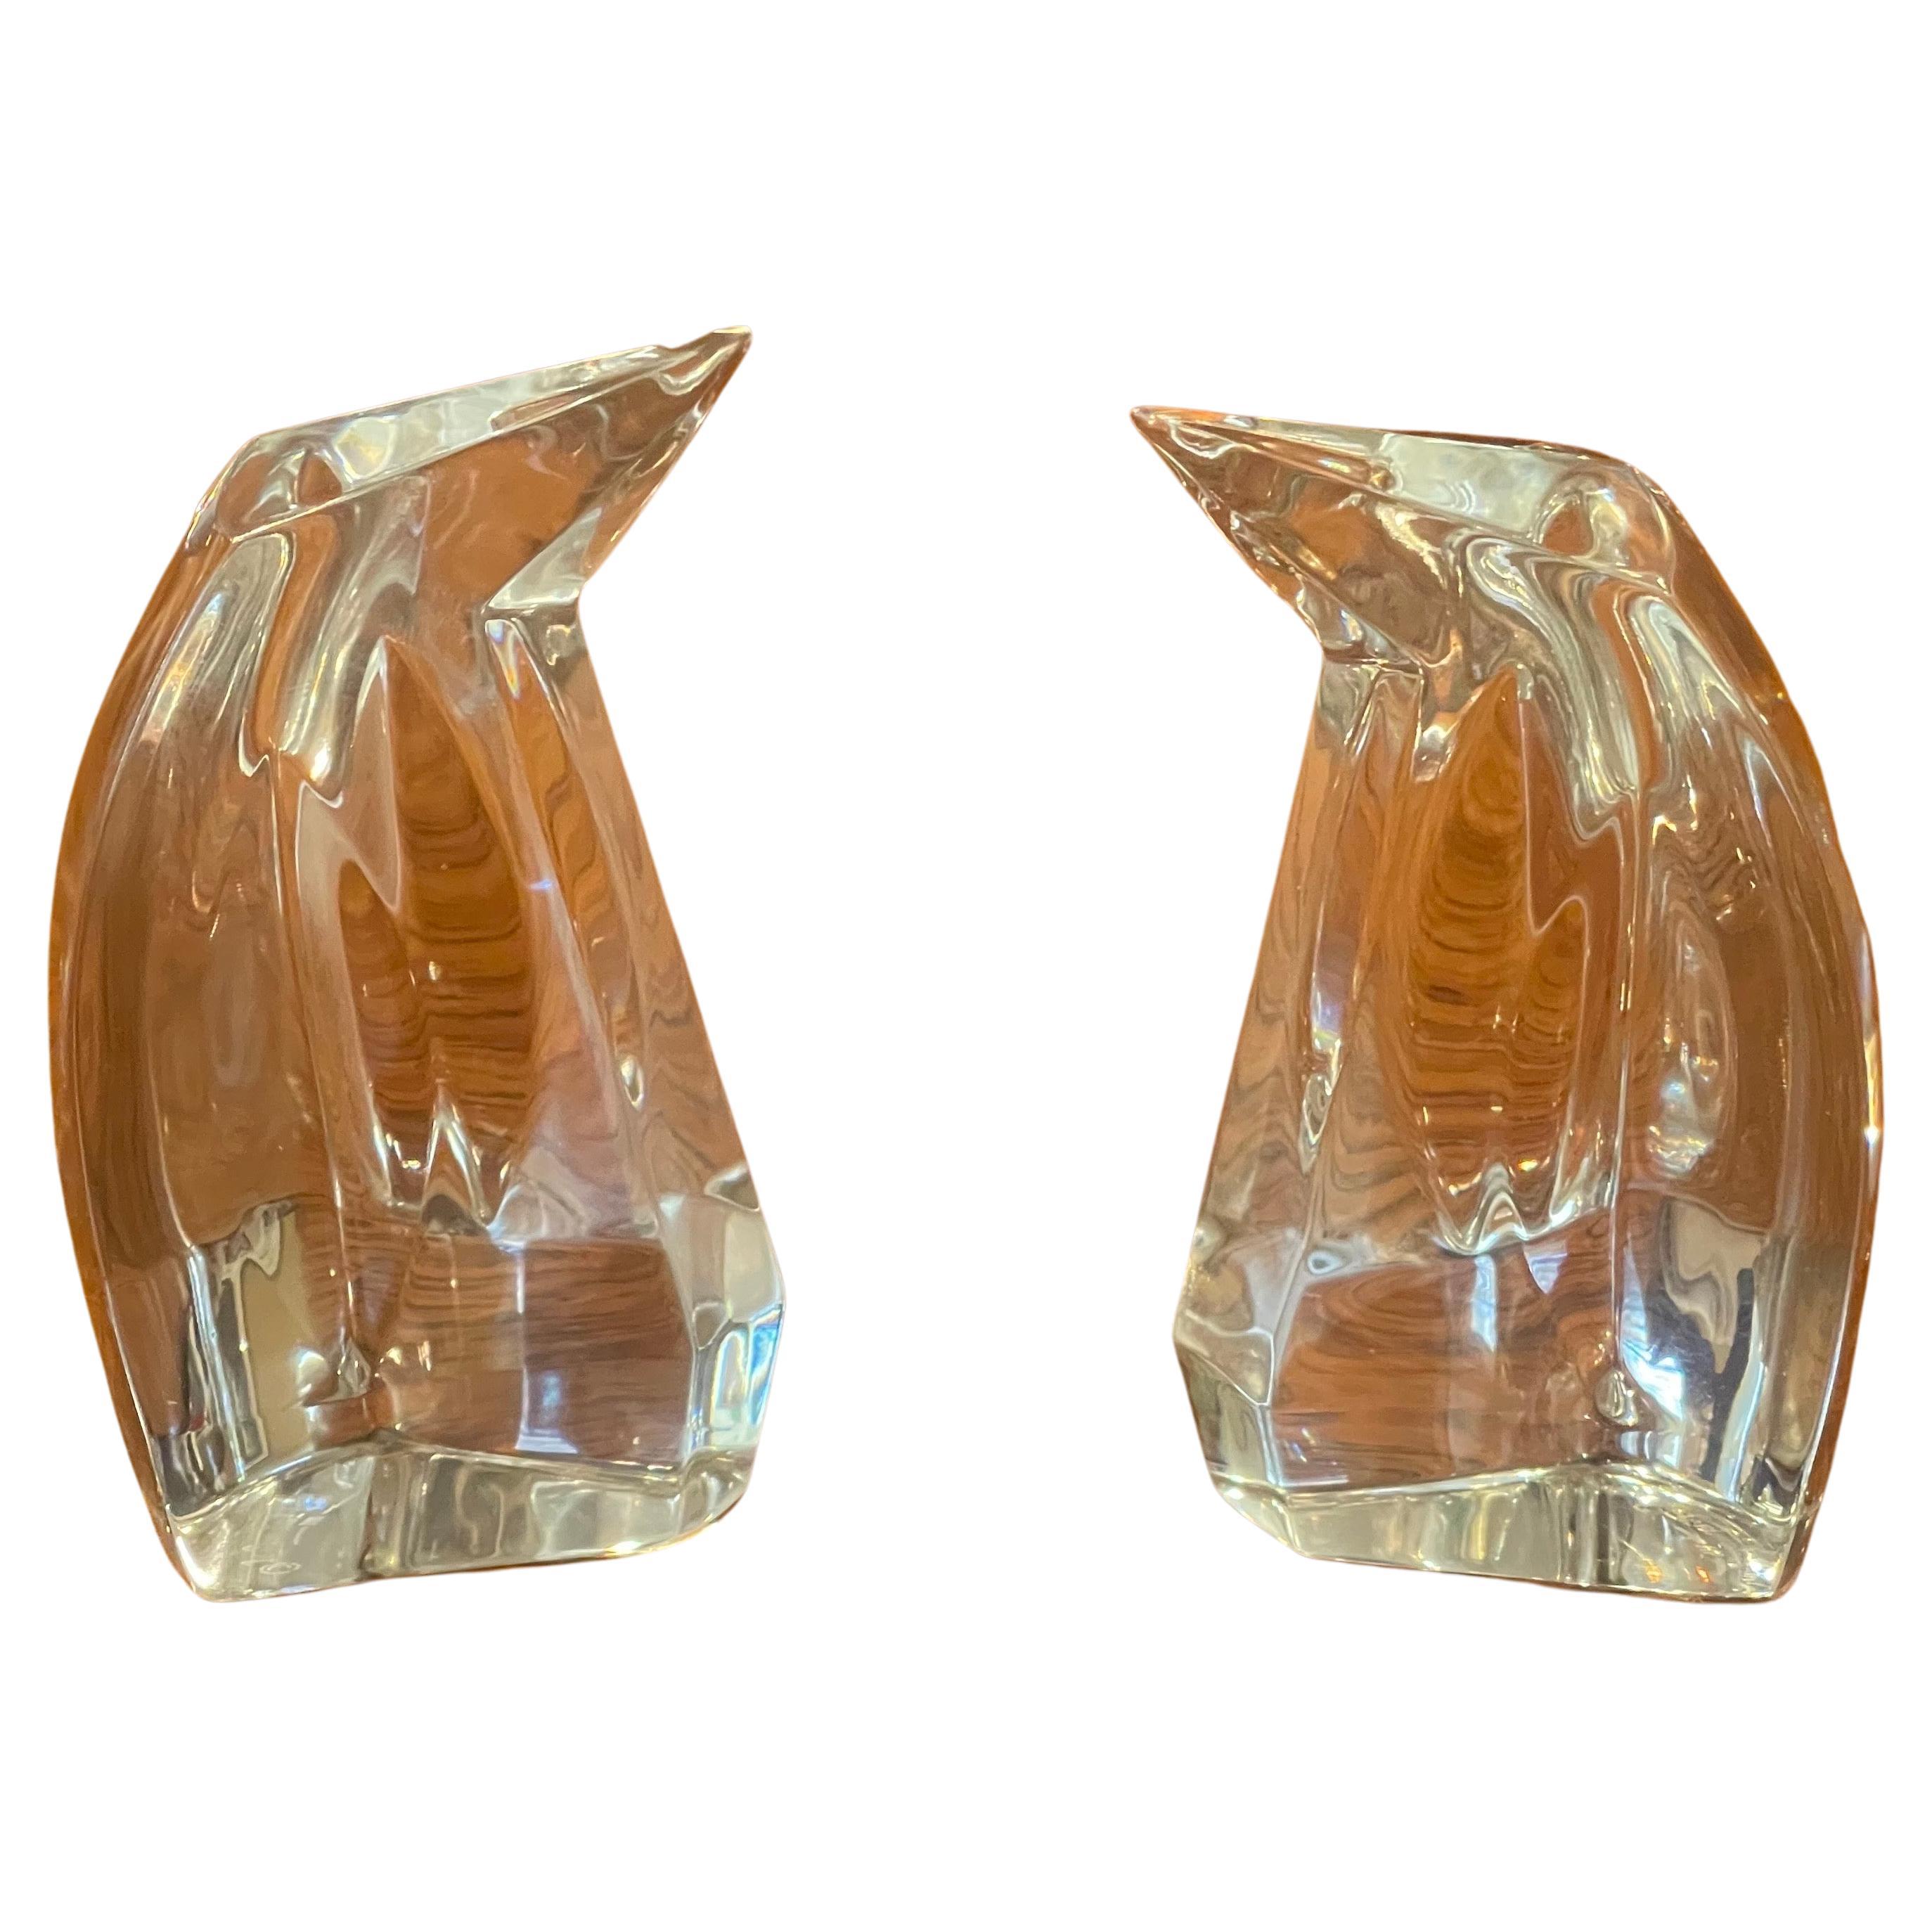 A pair of petite faceted clear crystal penguin sculptures by Val St. Lambert exclusively for the Danbury Mint, circa 1980s. The pair are in excellent condition with no chips or cracks and have a nice weight to them. Each penguin measures 1.75